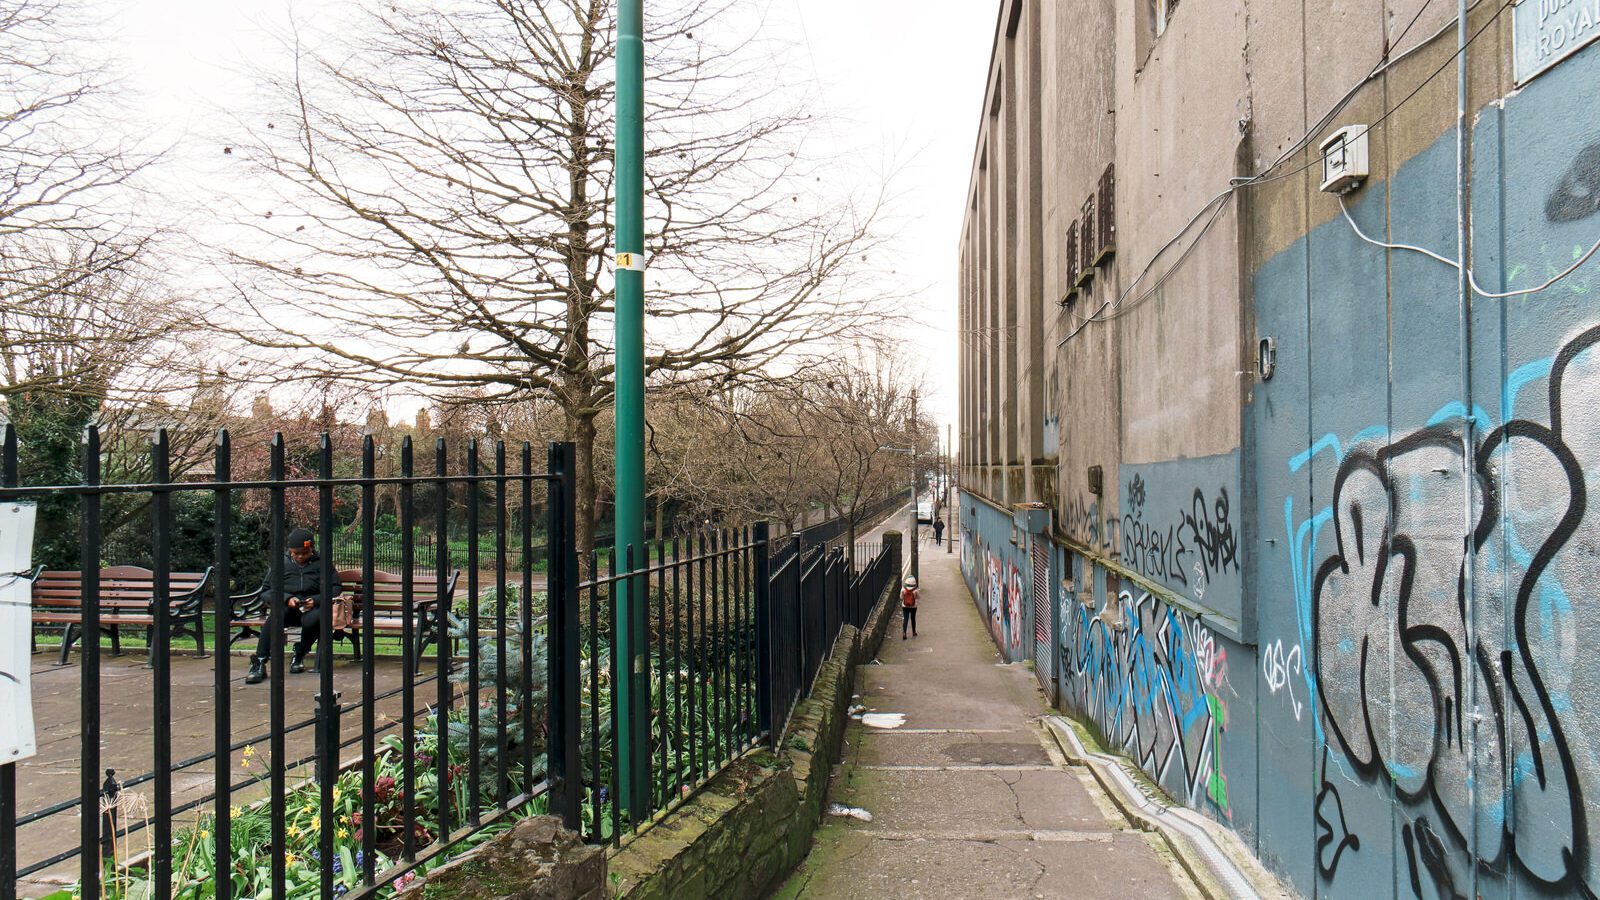 THE ROYAL CANAL WALK LINEAR PARK [FEATURING A 1916 EASTER RISING MEMORIAL]-229553-1